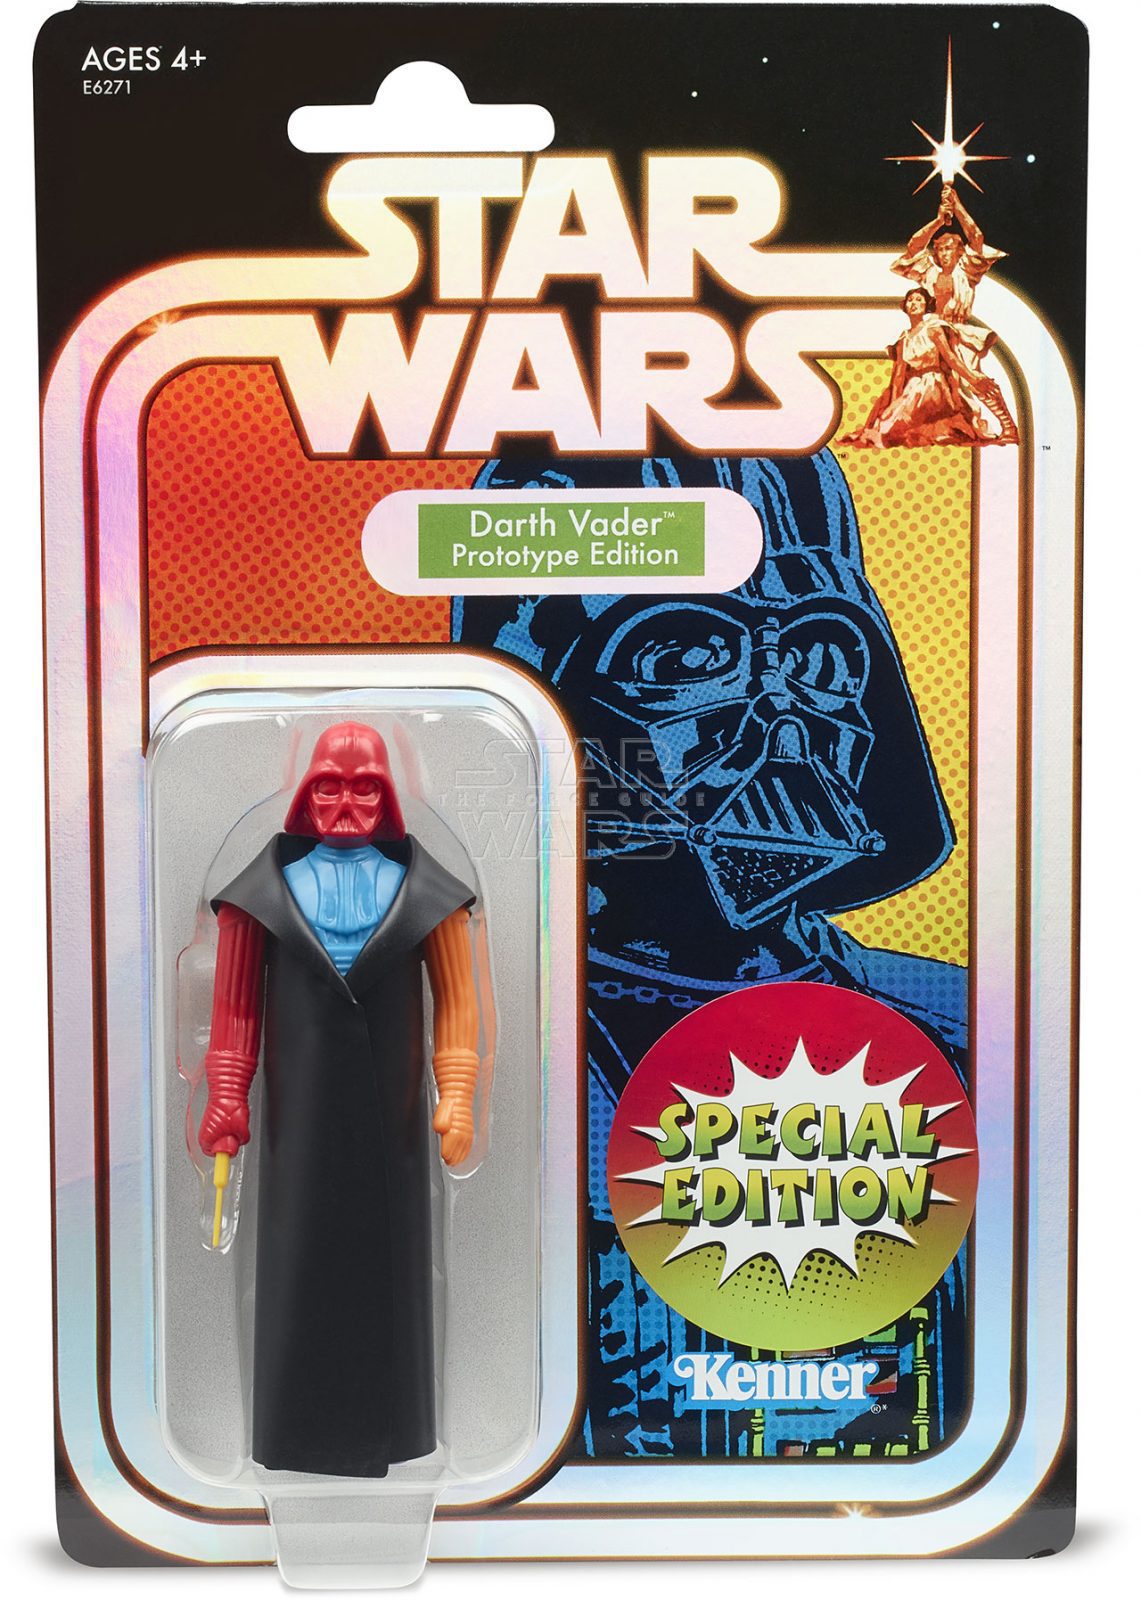 STAR-WARS-SPECIAL-EDITION-RETRO-PROTOTYPE-3.75-INCH-DARTH-VADER-Figure----in-pack-(1)